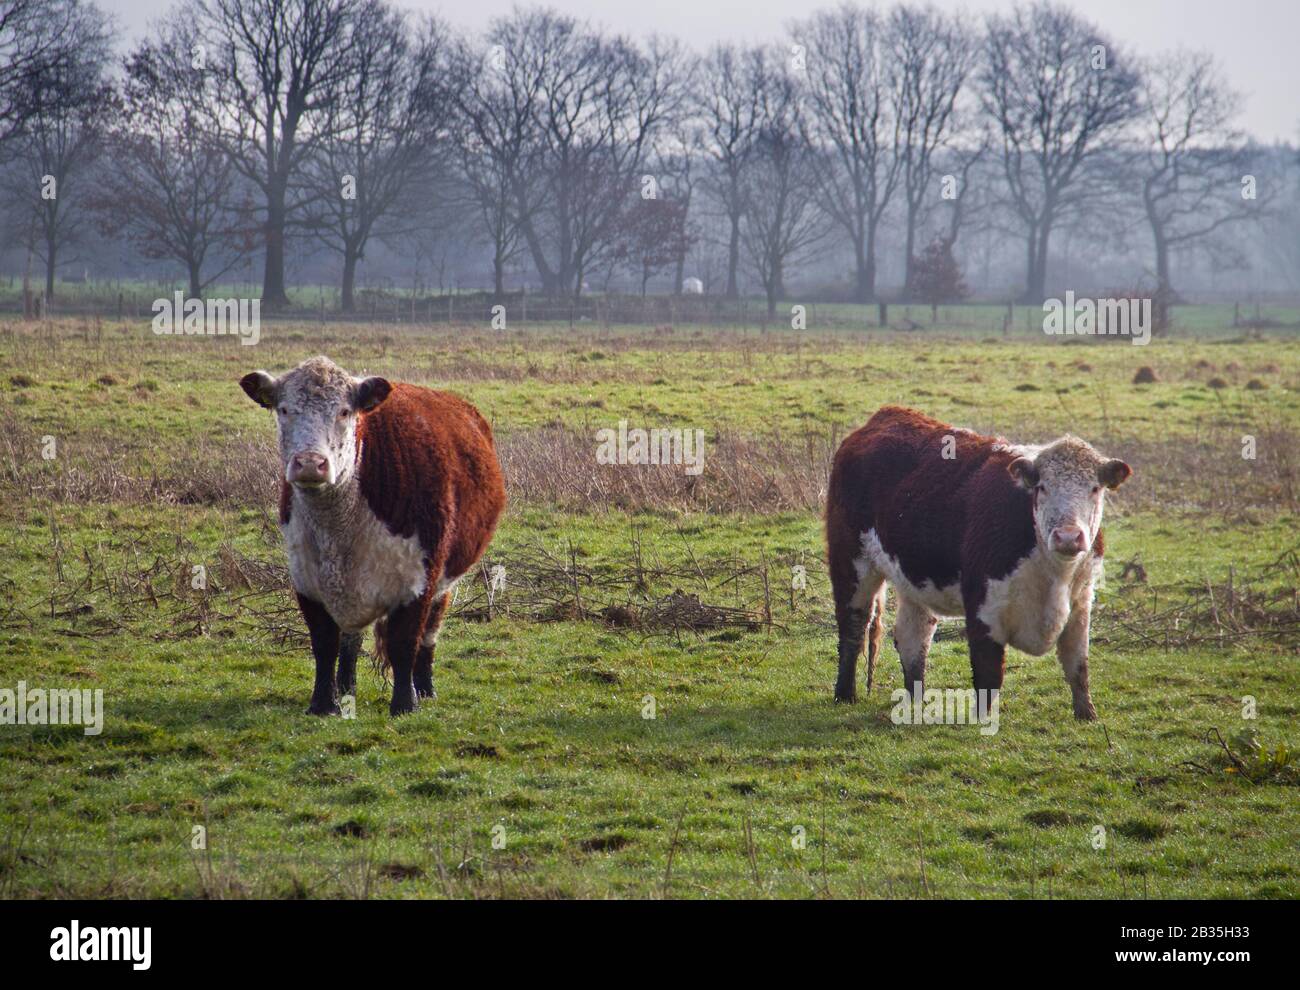 Hereford-cattle grazing in a Dutch nature reserve Stock Photo